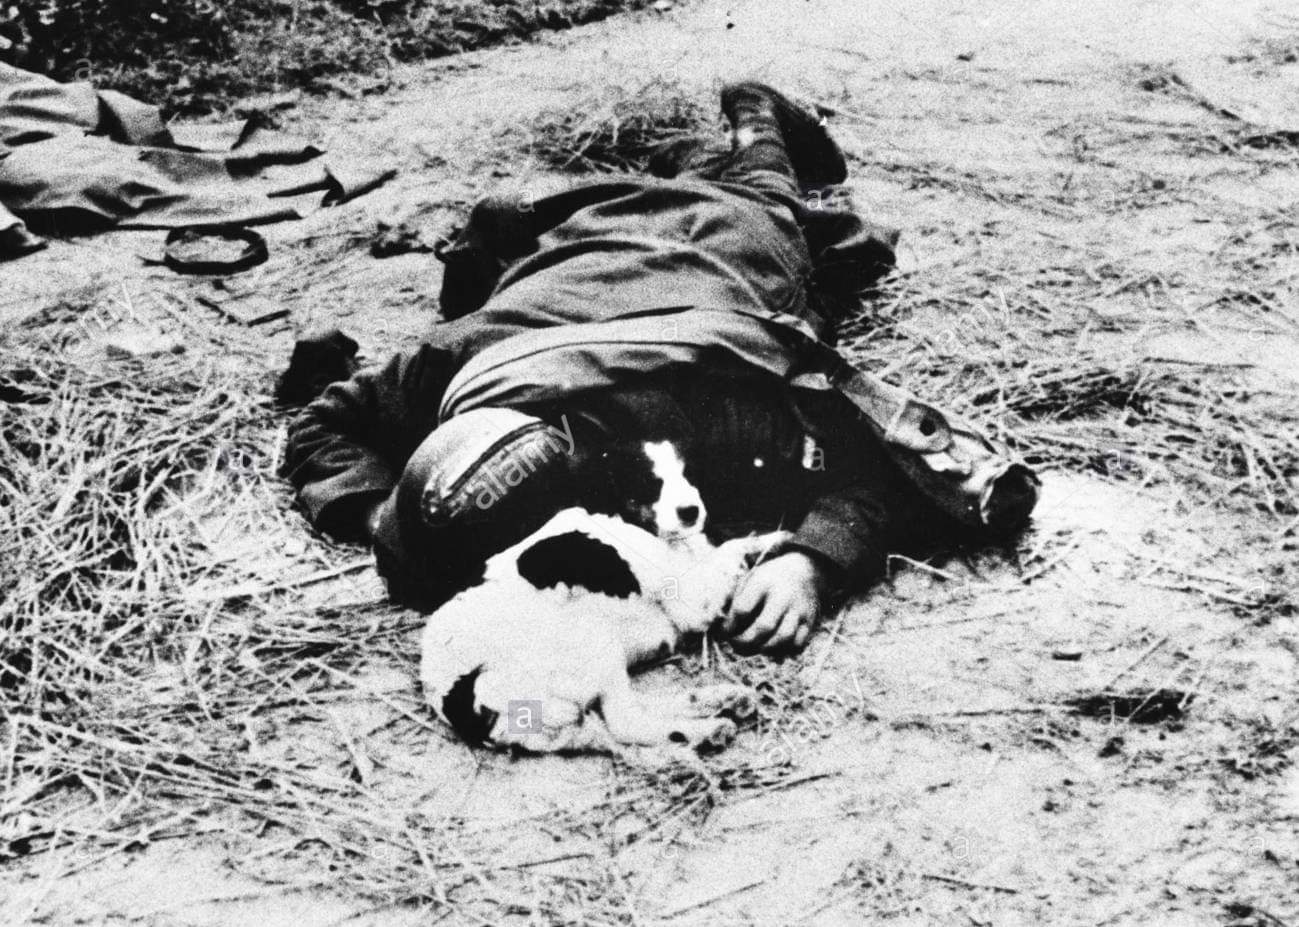 The body of a French soldier killed in 1940 is guarded by his dog.